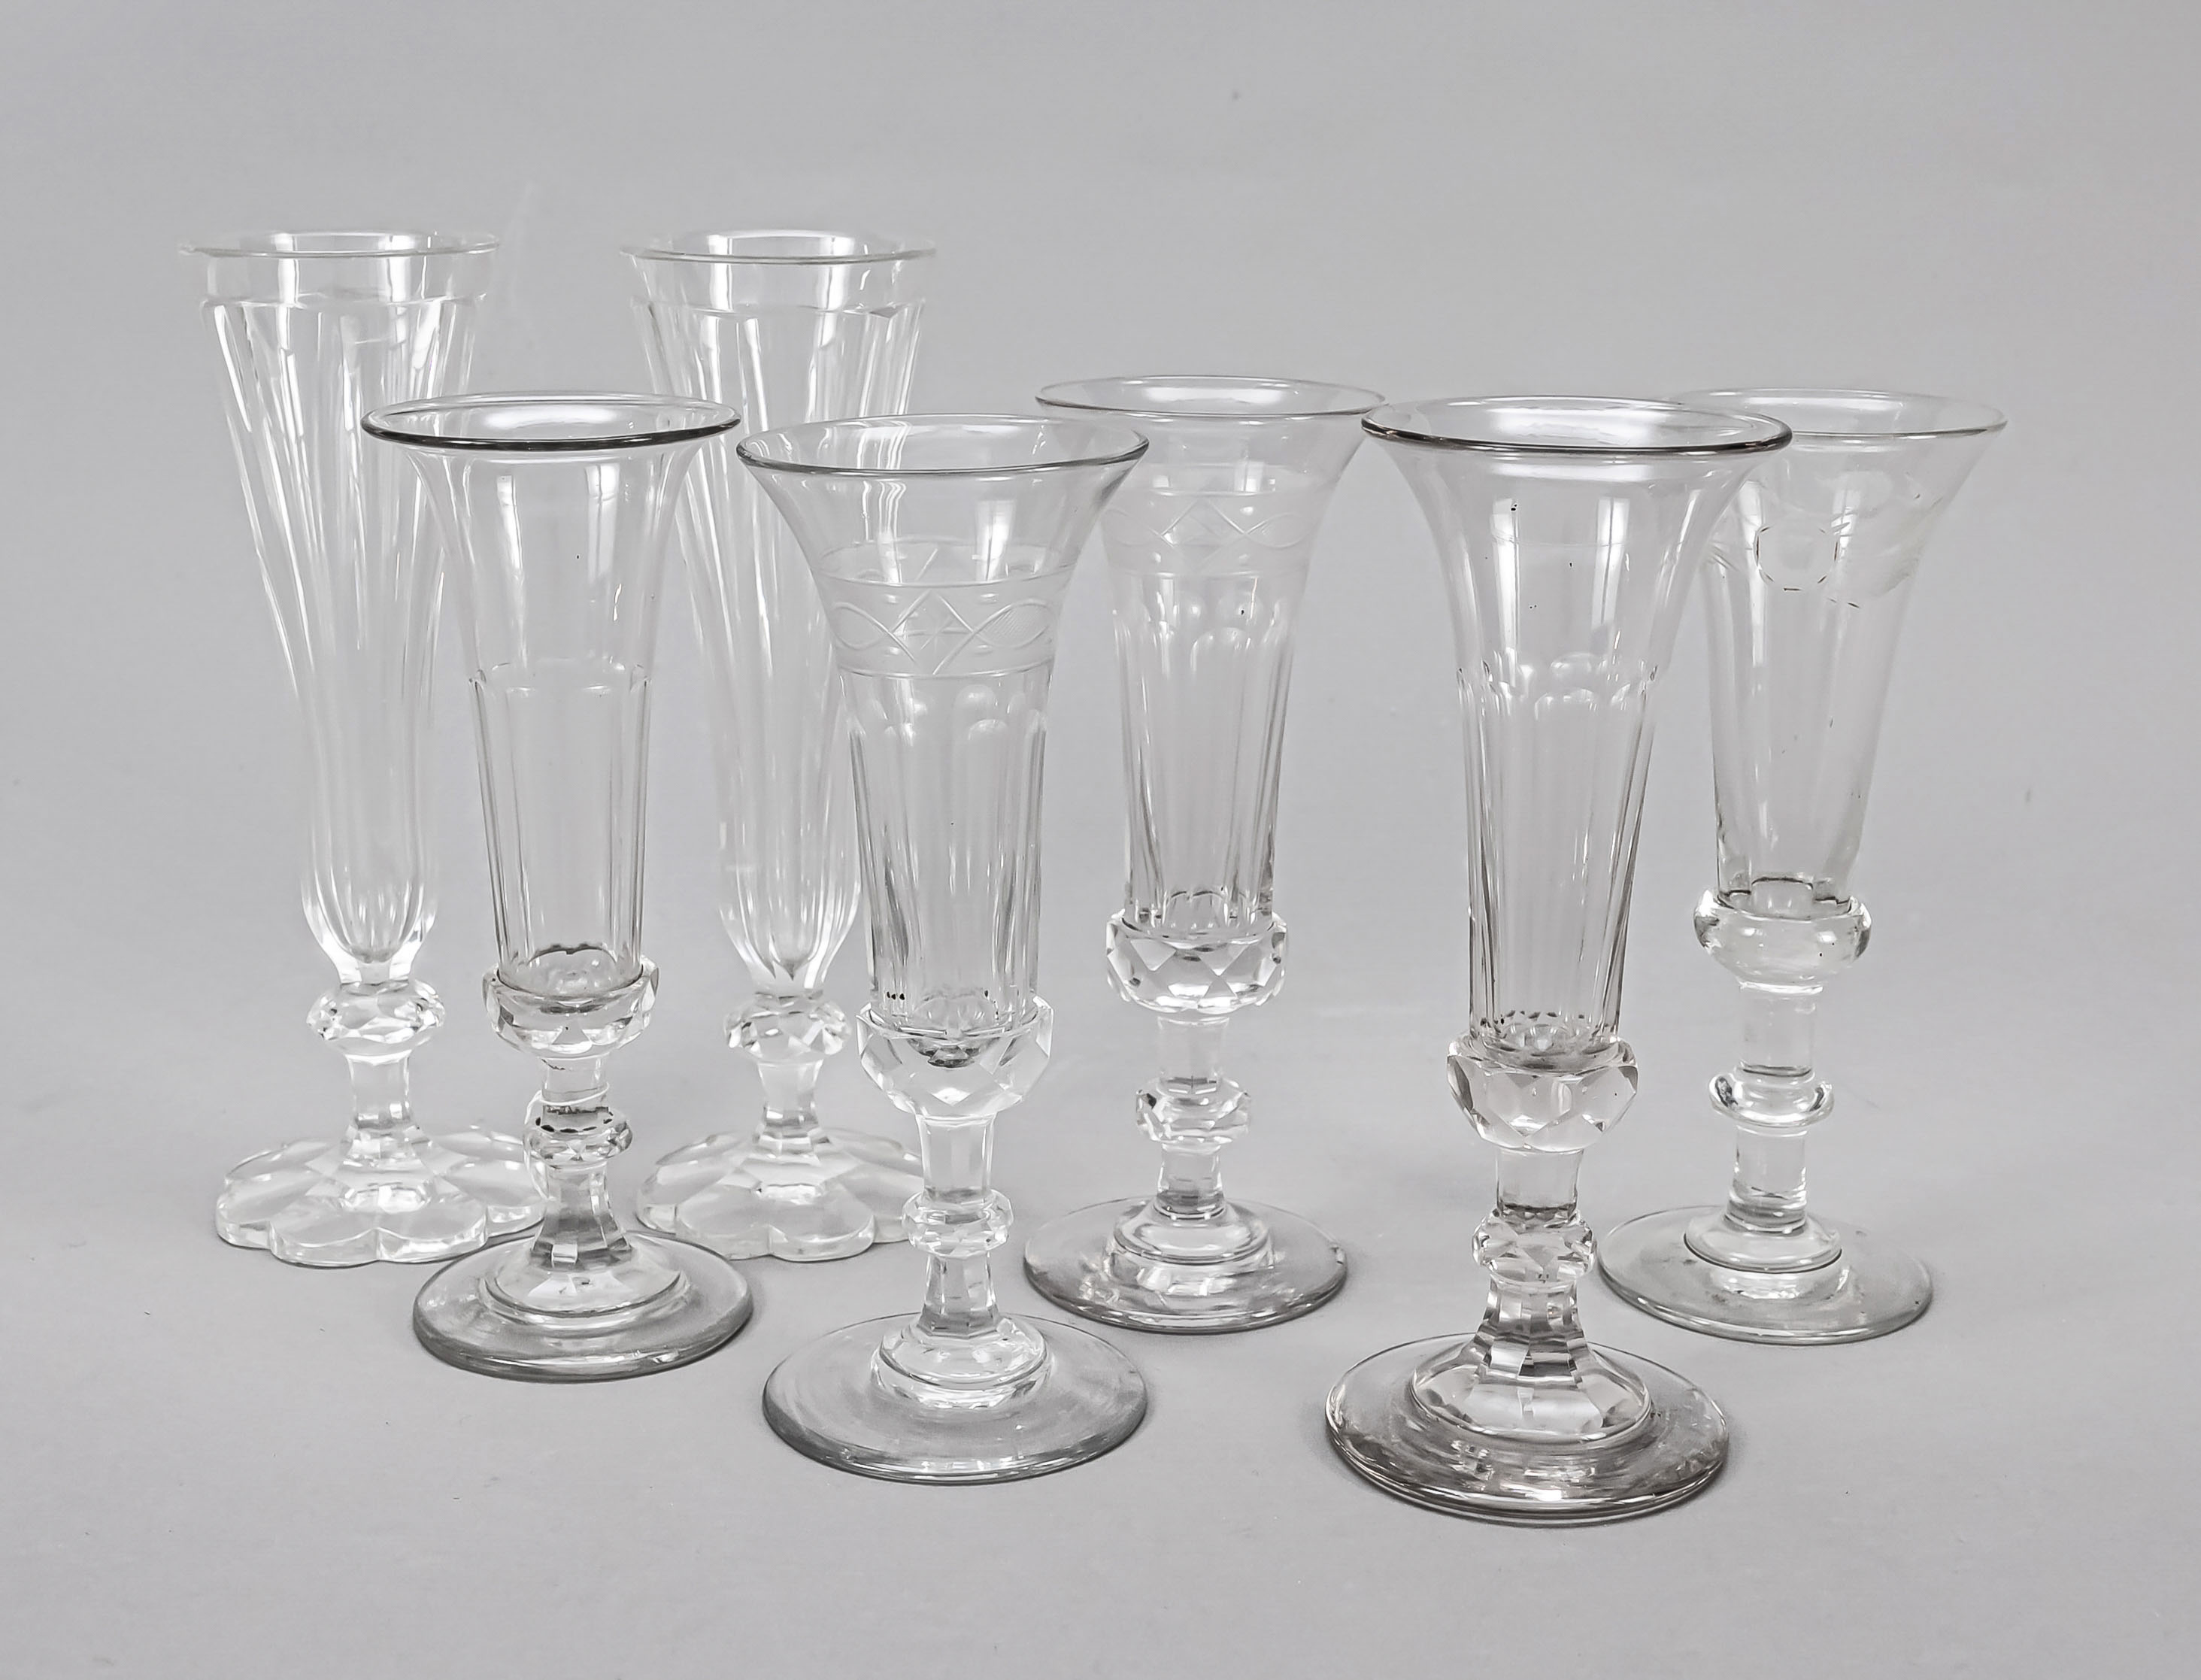 Set of seven champagne flutes, 19th/20th century, different shapes and sizes, each clear glass - Image 2 of 2